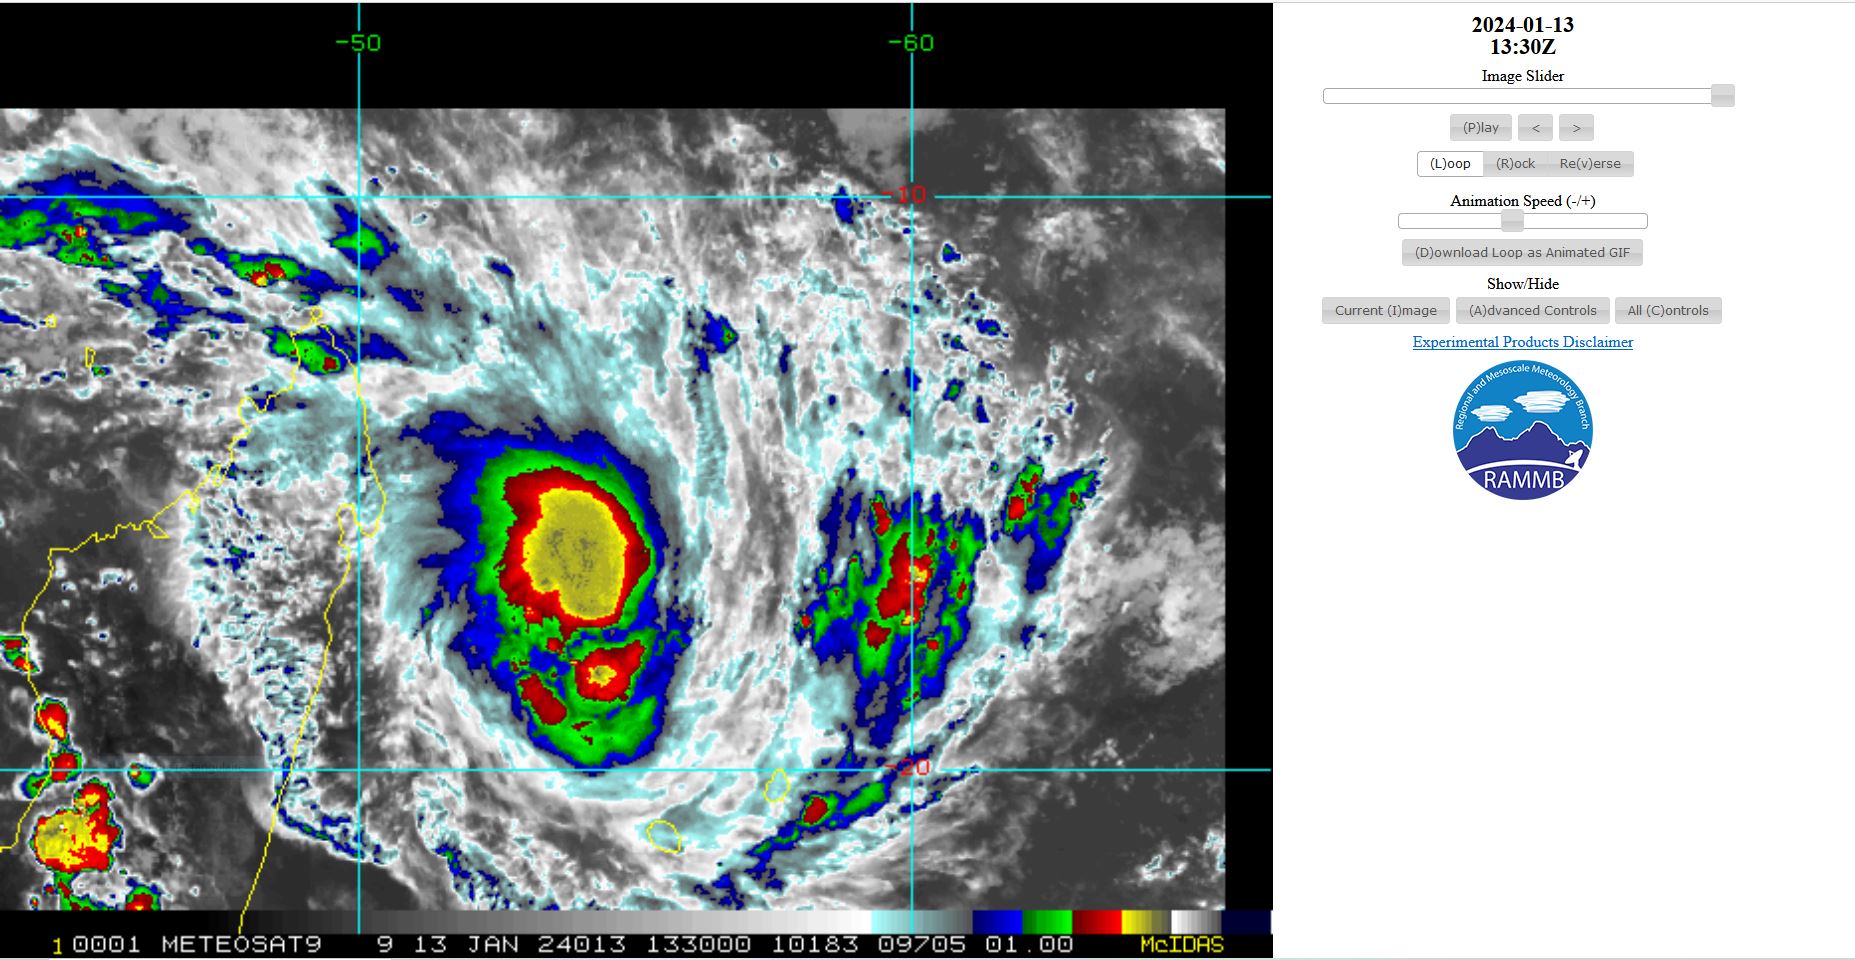 TC 05S(BELAL) is forecast to hit REUNION island by 48h with gusts potentially over 200km/h//1315utc